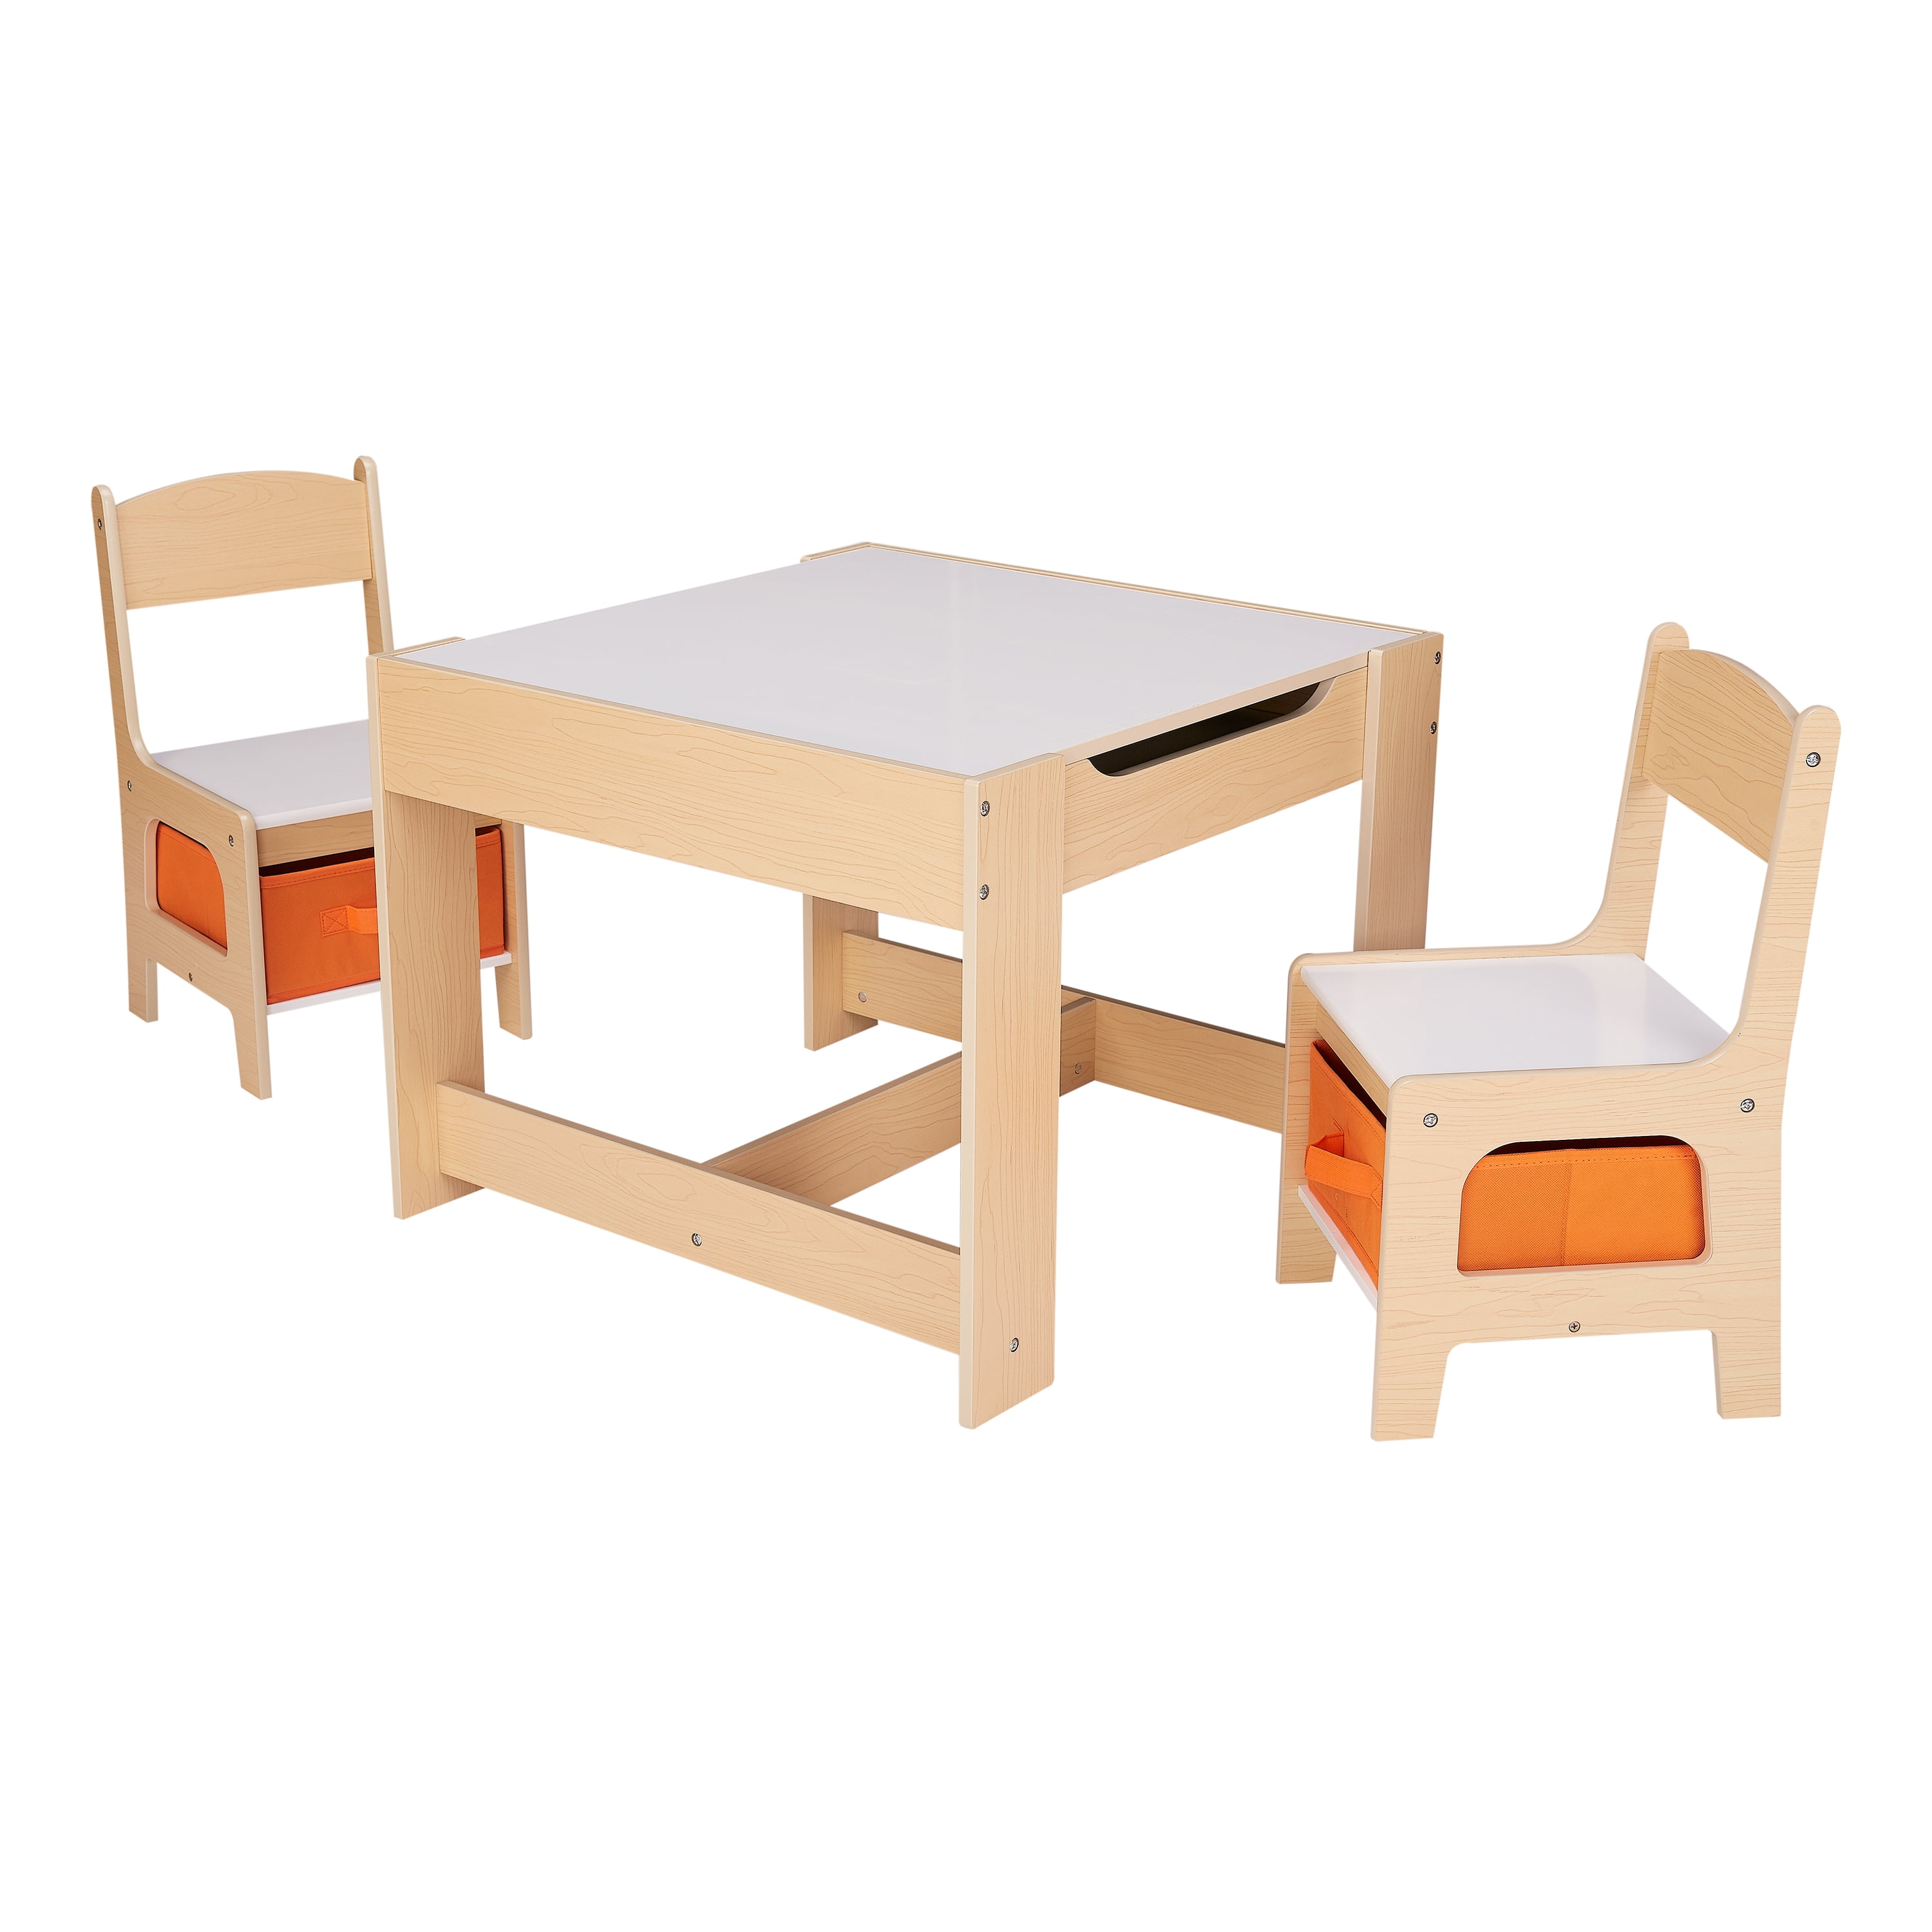 Wooden Kids Table and 2 Chairs Set Solid Hard Wood sturdy child table and chairs 